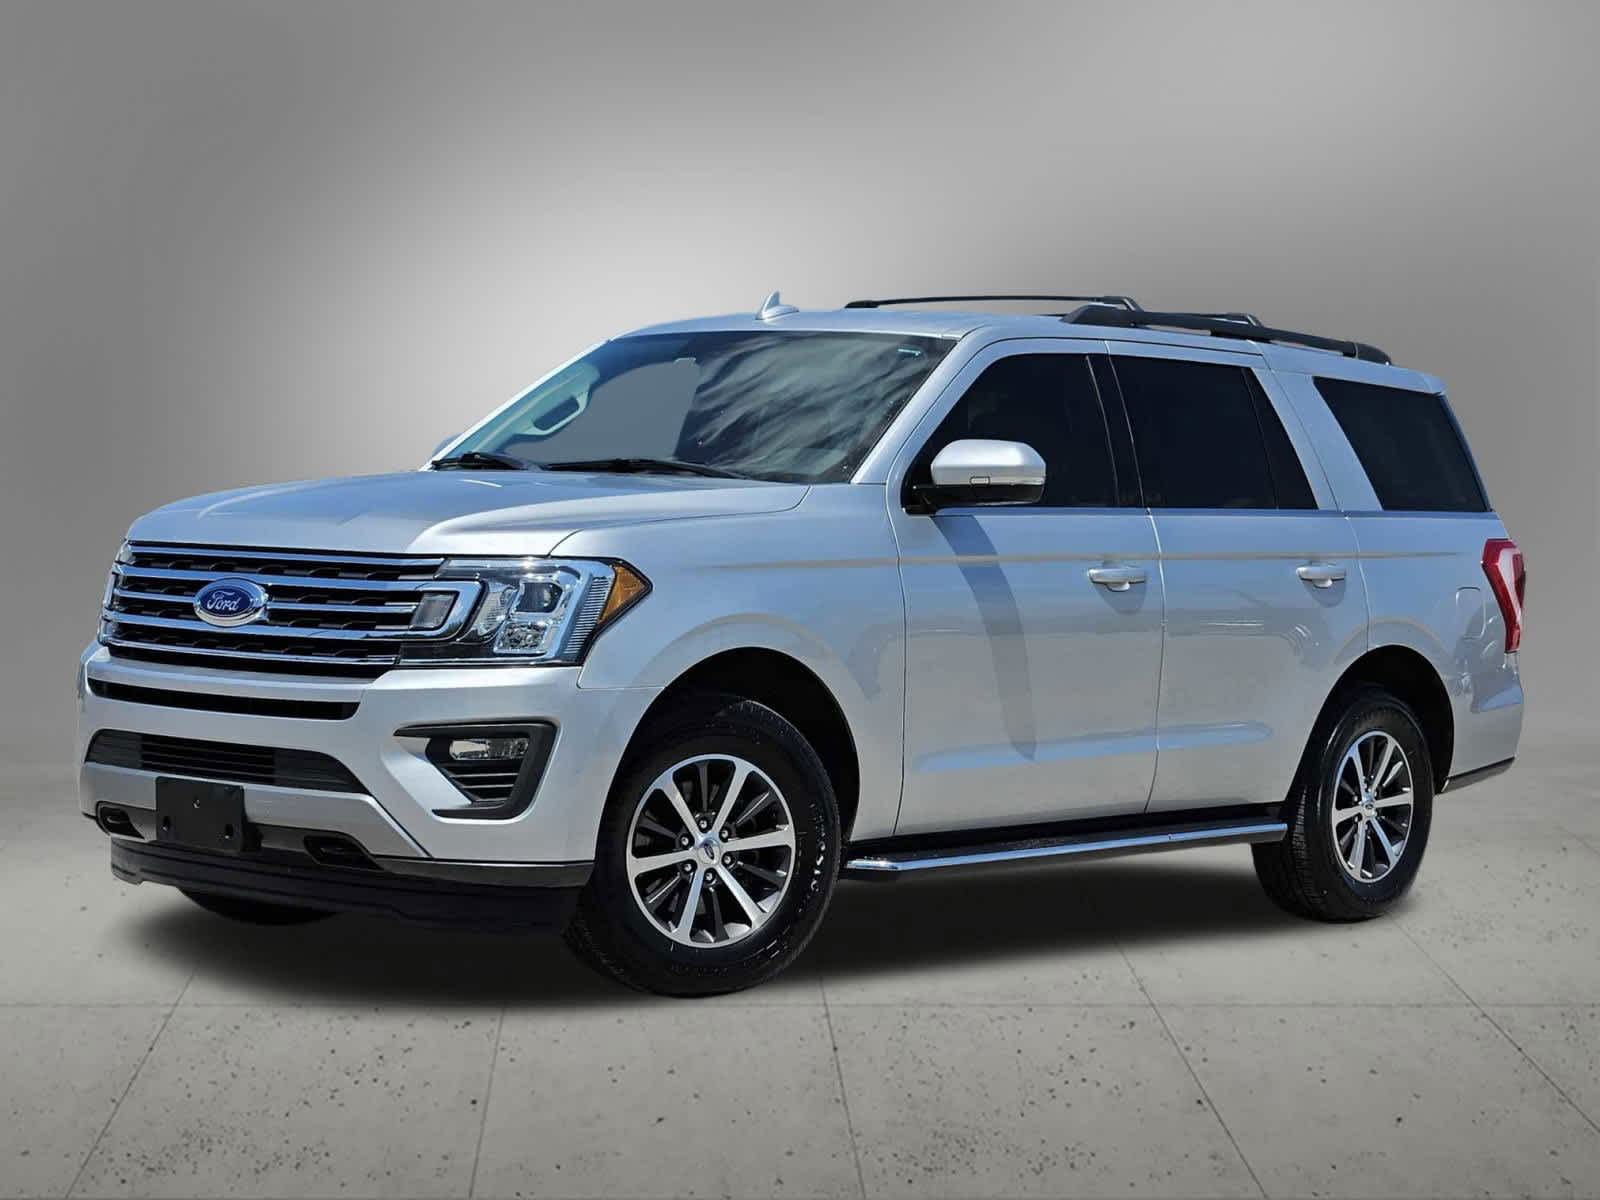 2019 Ford Expedition XLT -
                Dallas, TX